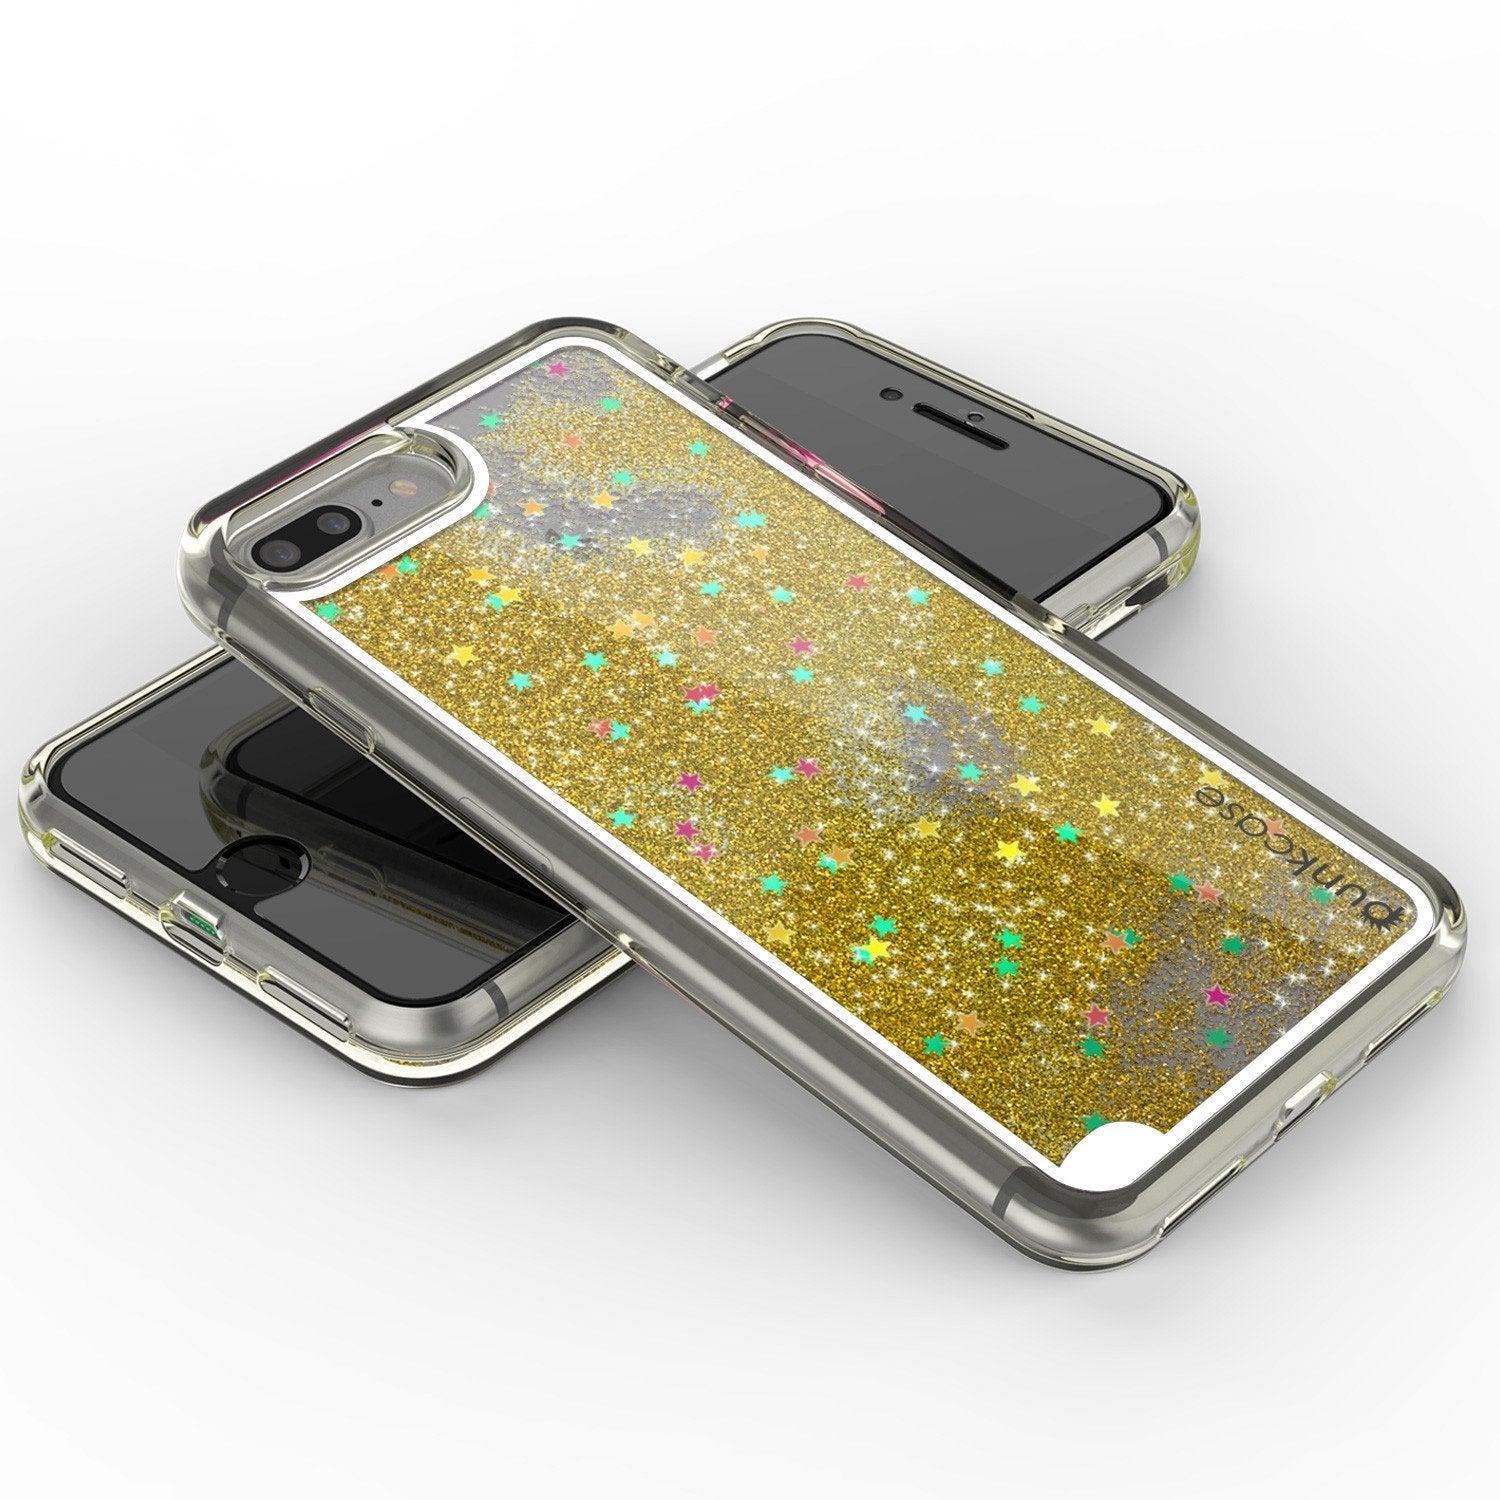 iPhone 8+ Plus Case, PunkСase LIQUID Gold Series, Protective Dual Layer Floating Glitter Cover - PunkCase NZ